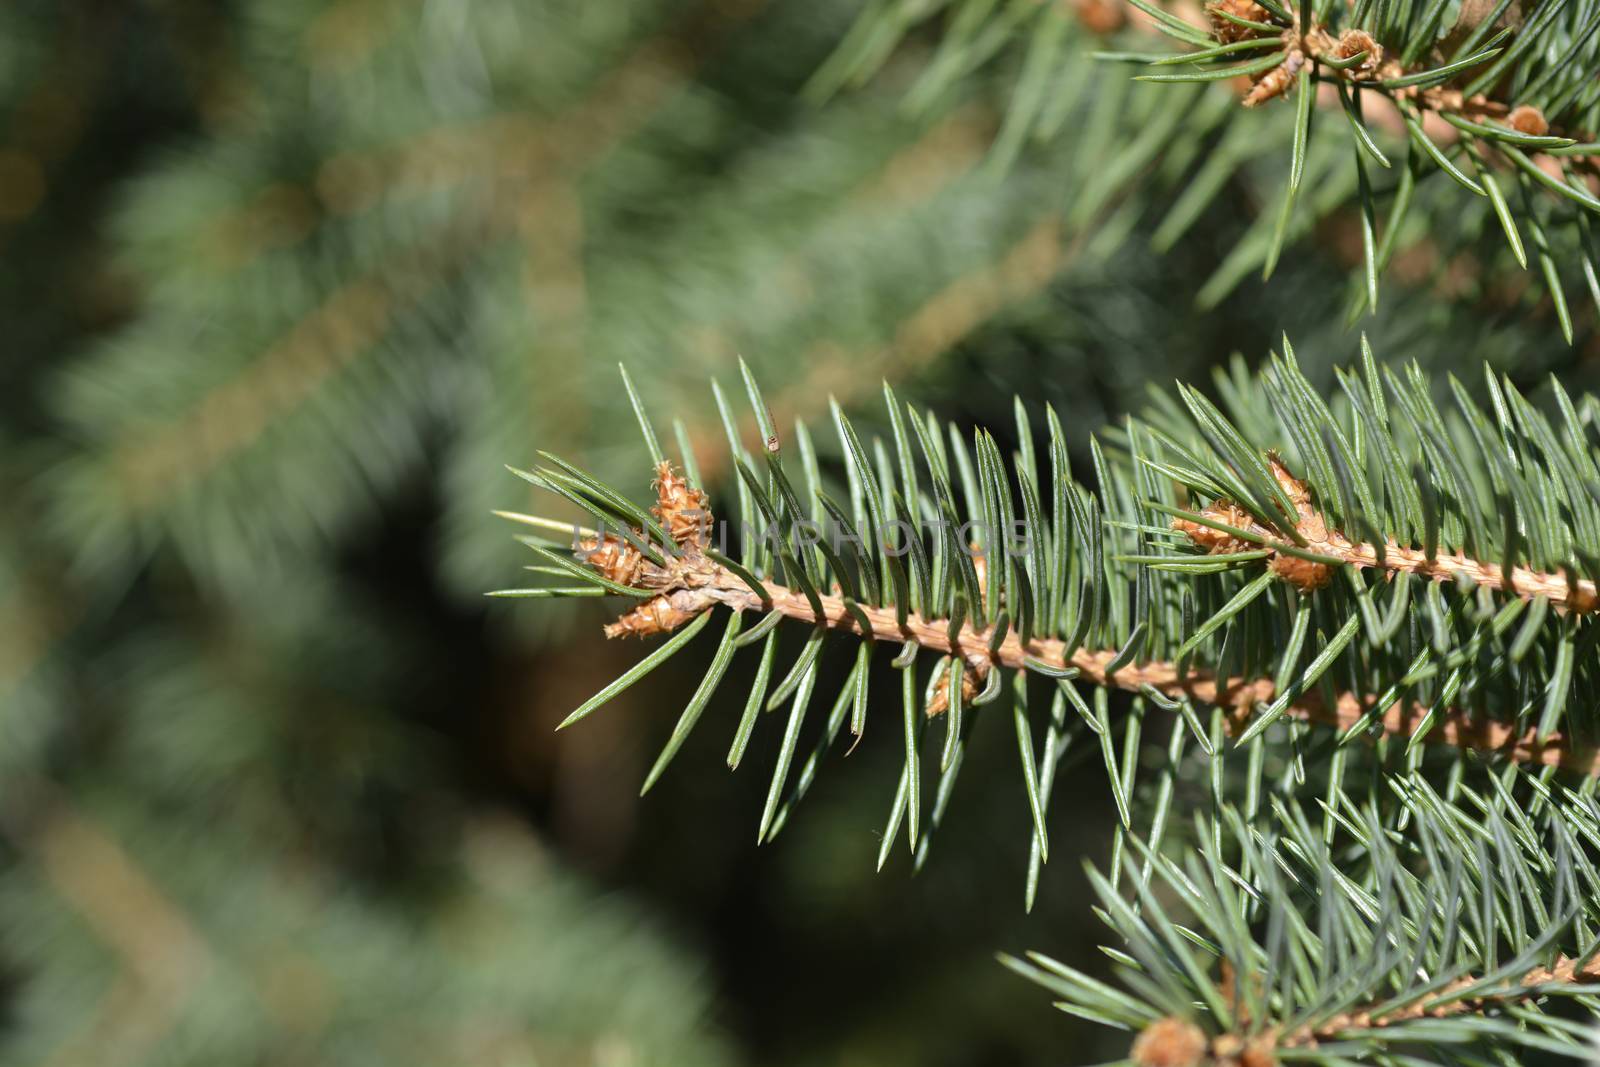 Norway spruce branch - Latin name - Picea abies